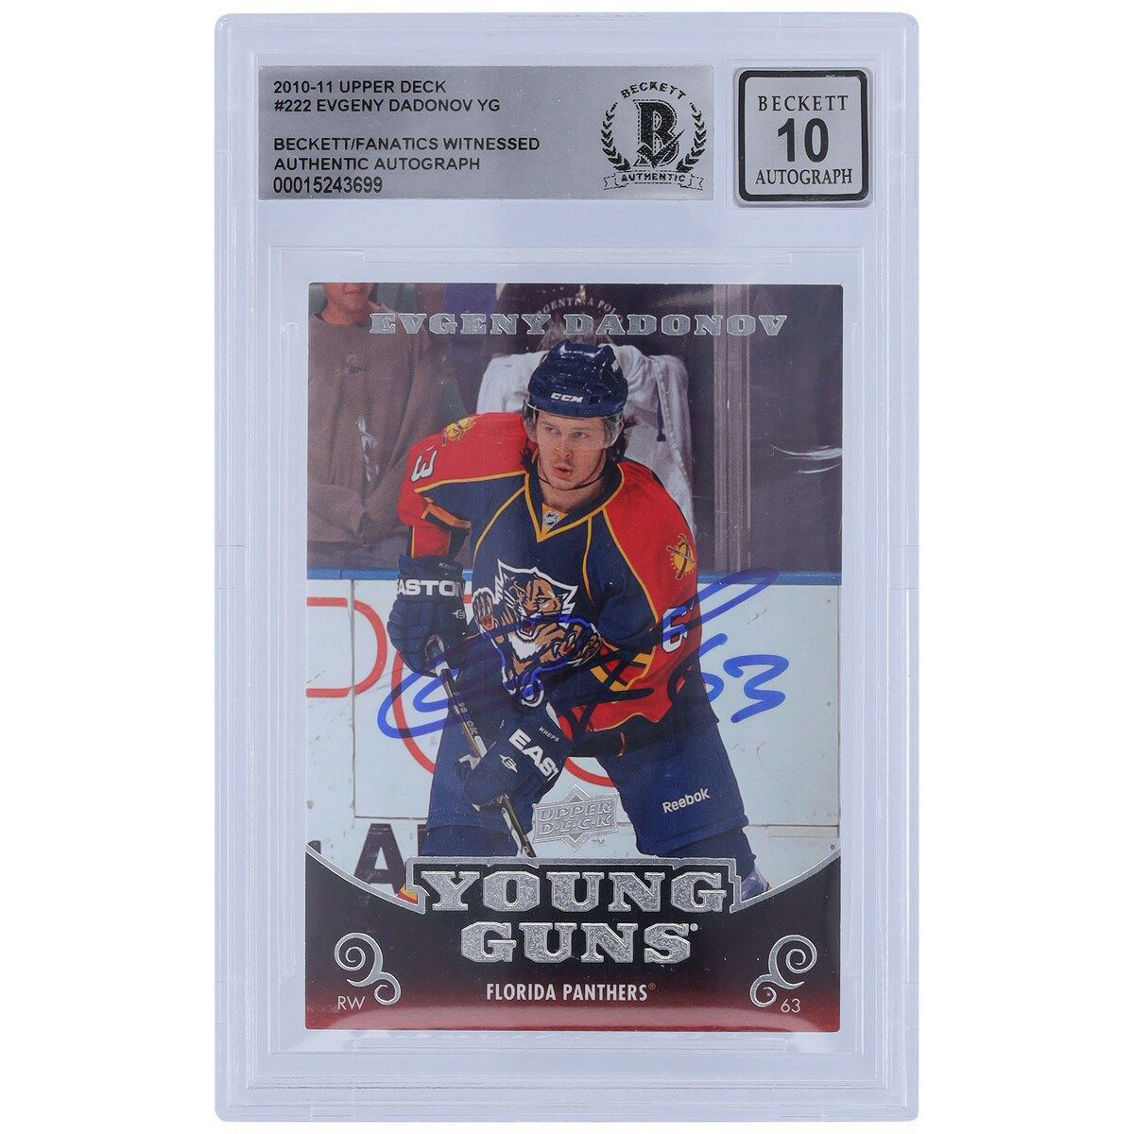 Upper Deck Evgenii Dadonov Florida Panthers Autographed 2010-11 Upper Deck Young Guns #222 Beckett Fanatics Witnessed Authenticated 10 Rookie Card - Image 2 of 3